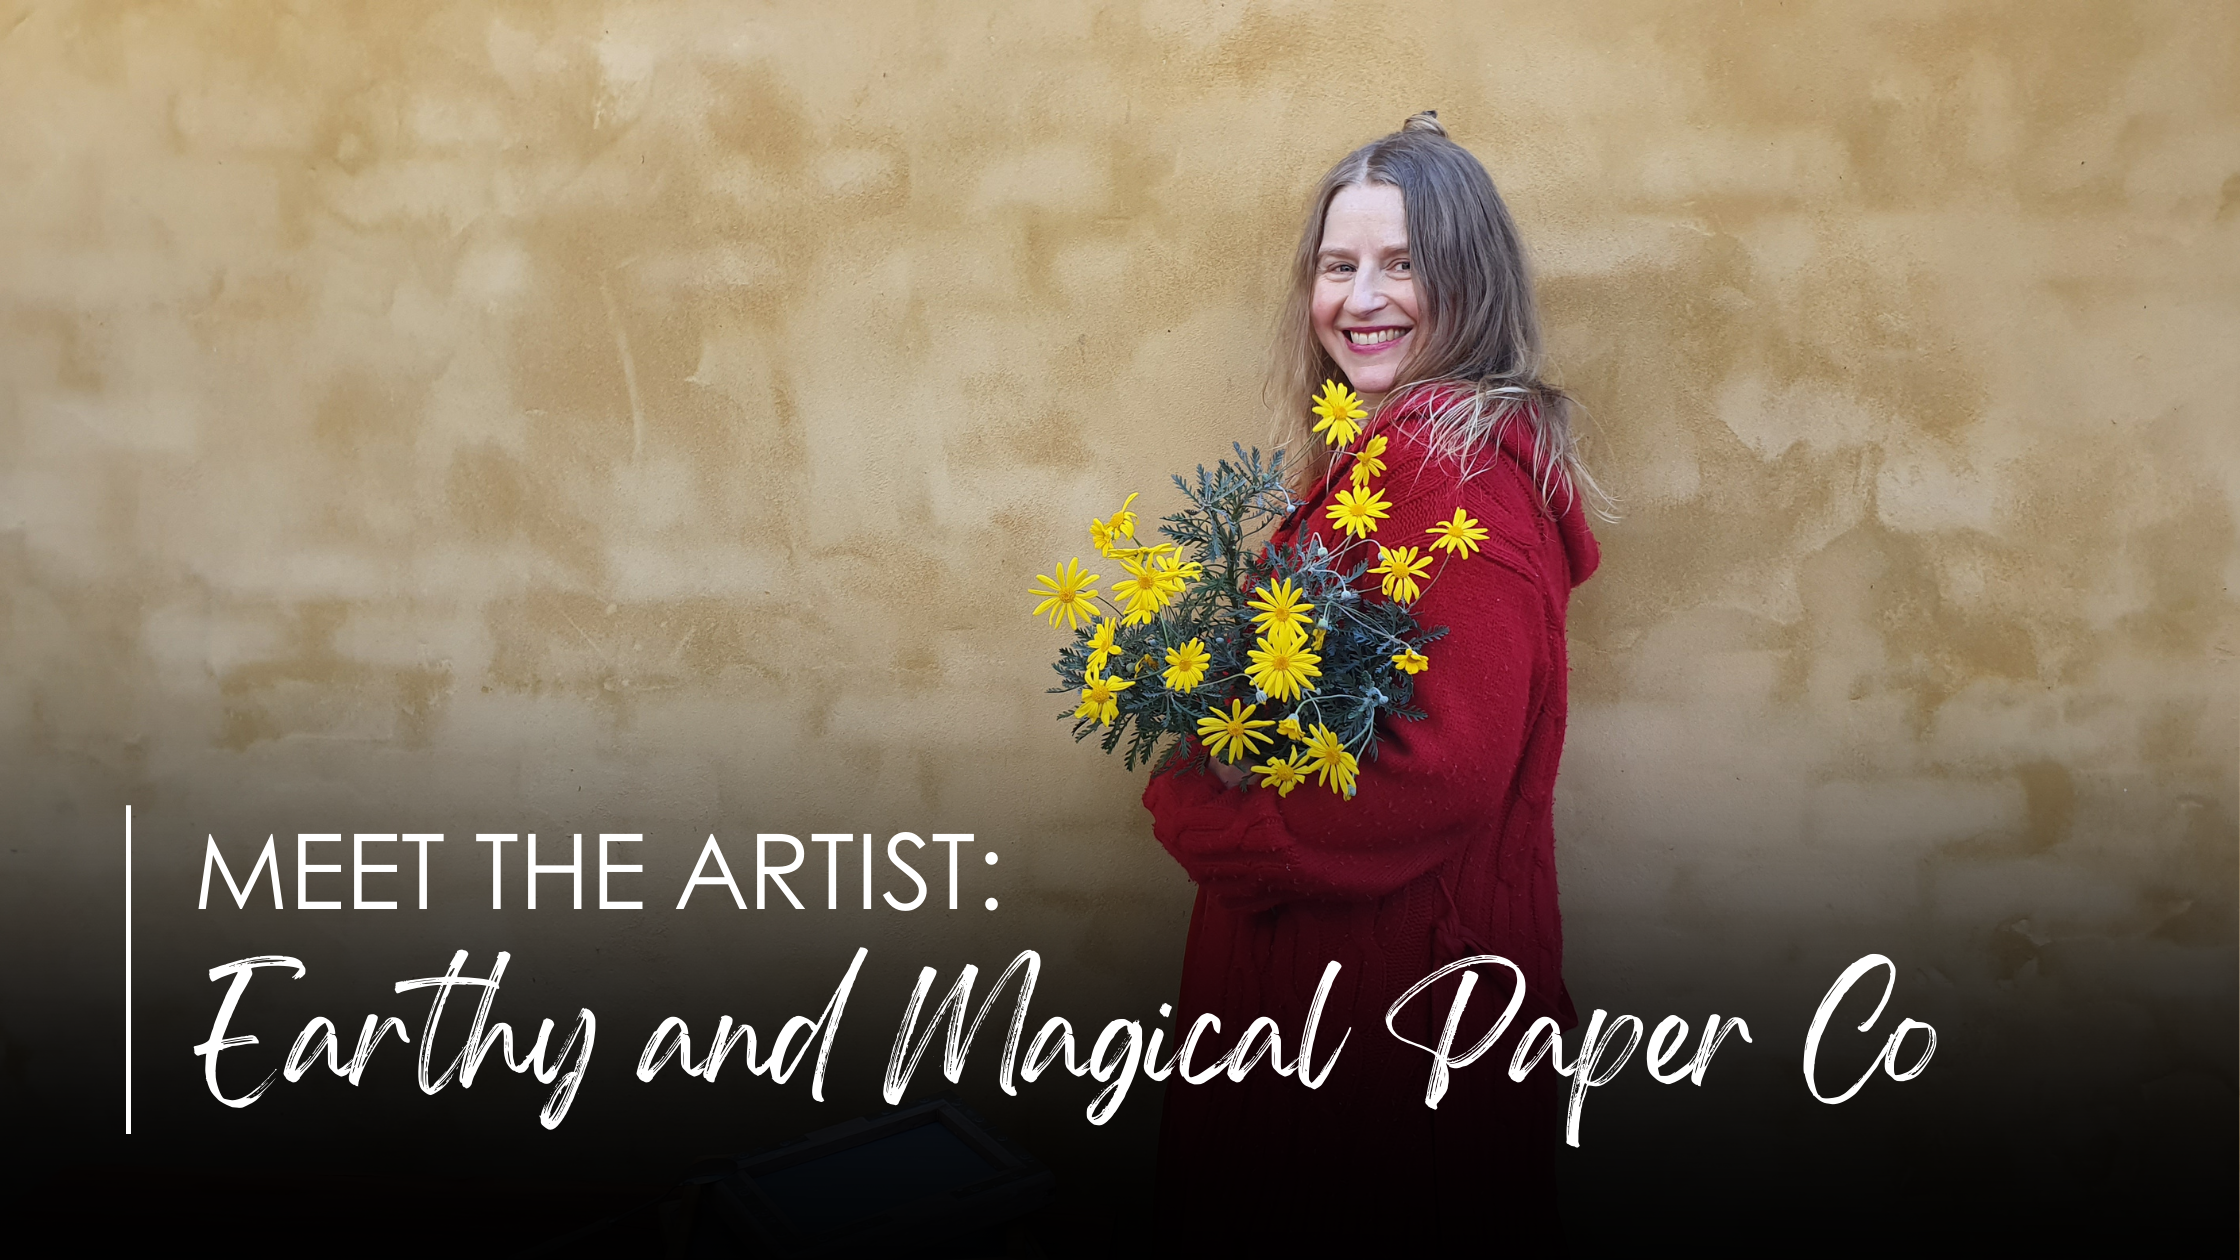 Meet the Artist: Earthy and Magical Paper Co.